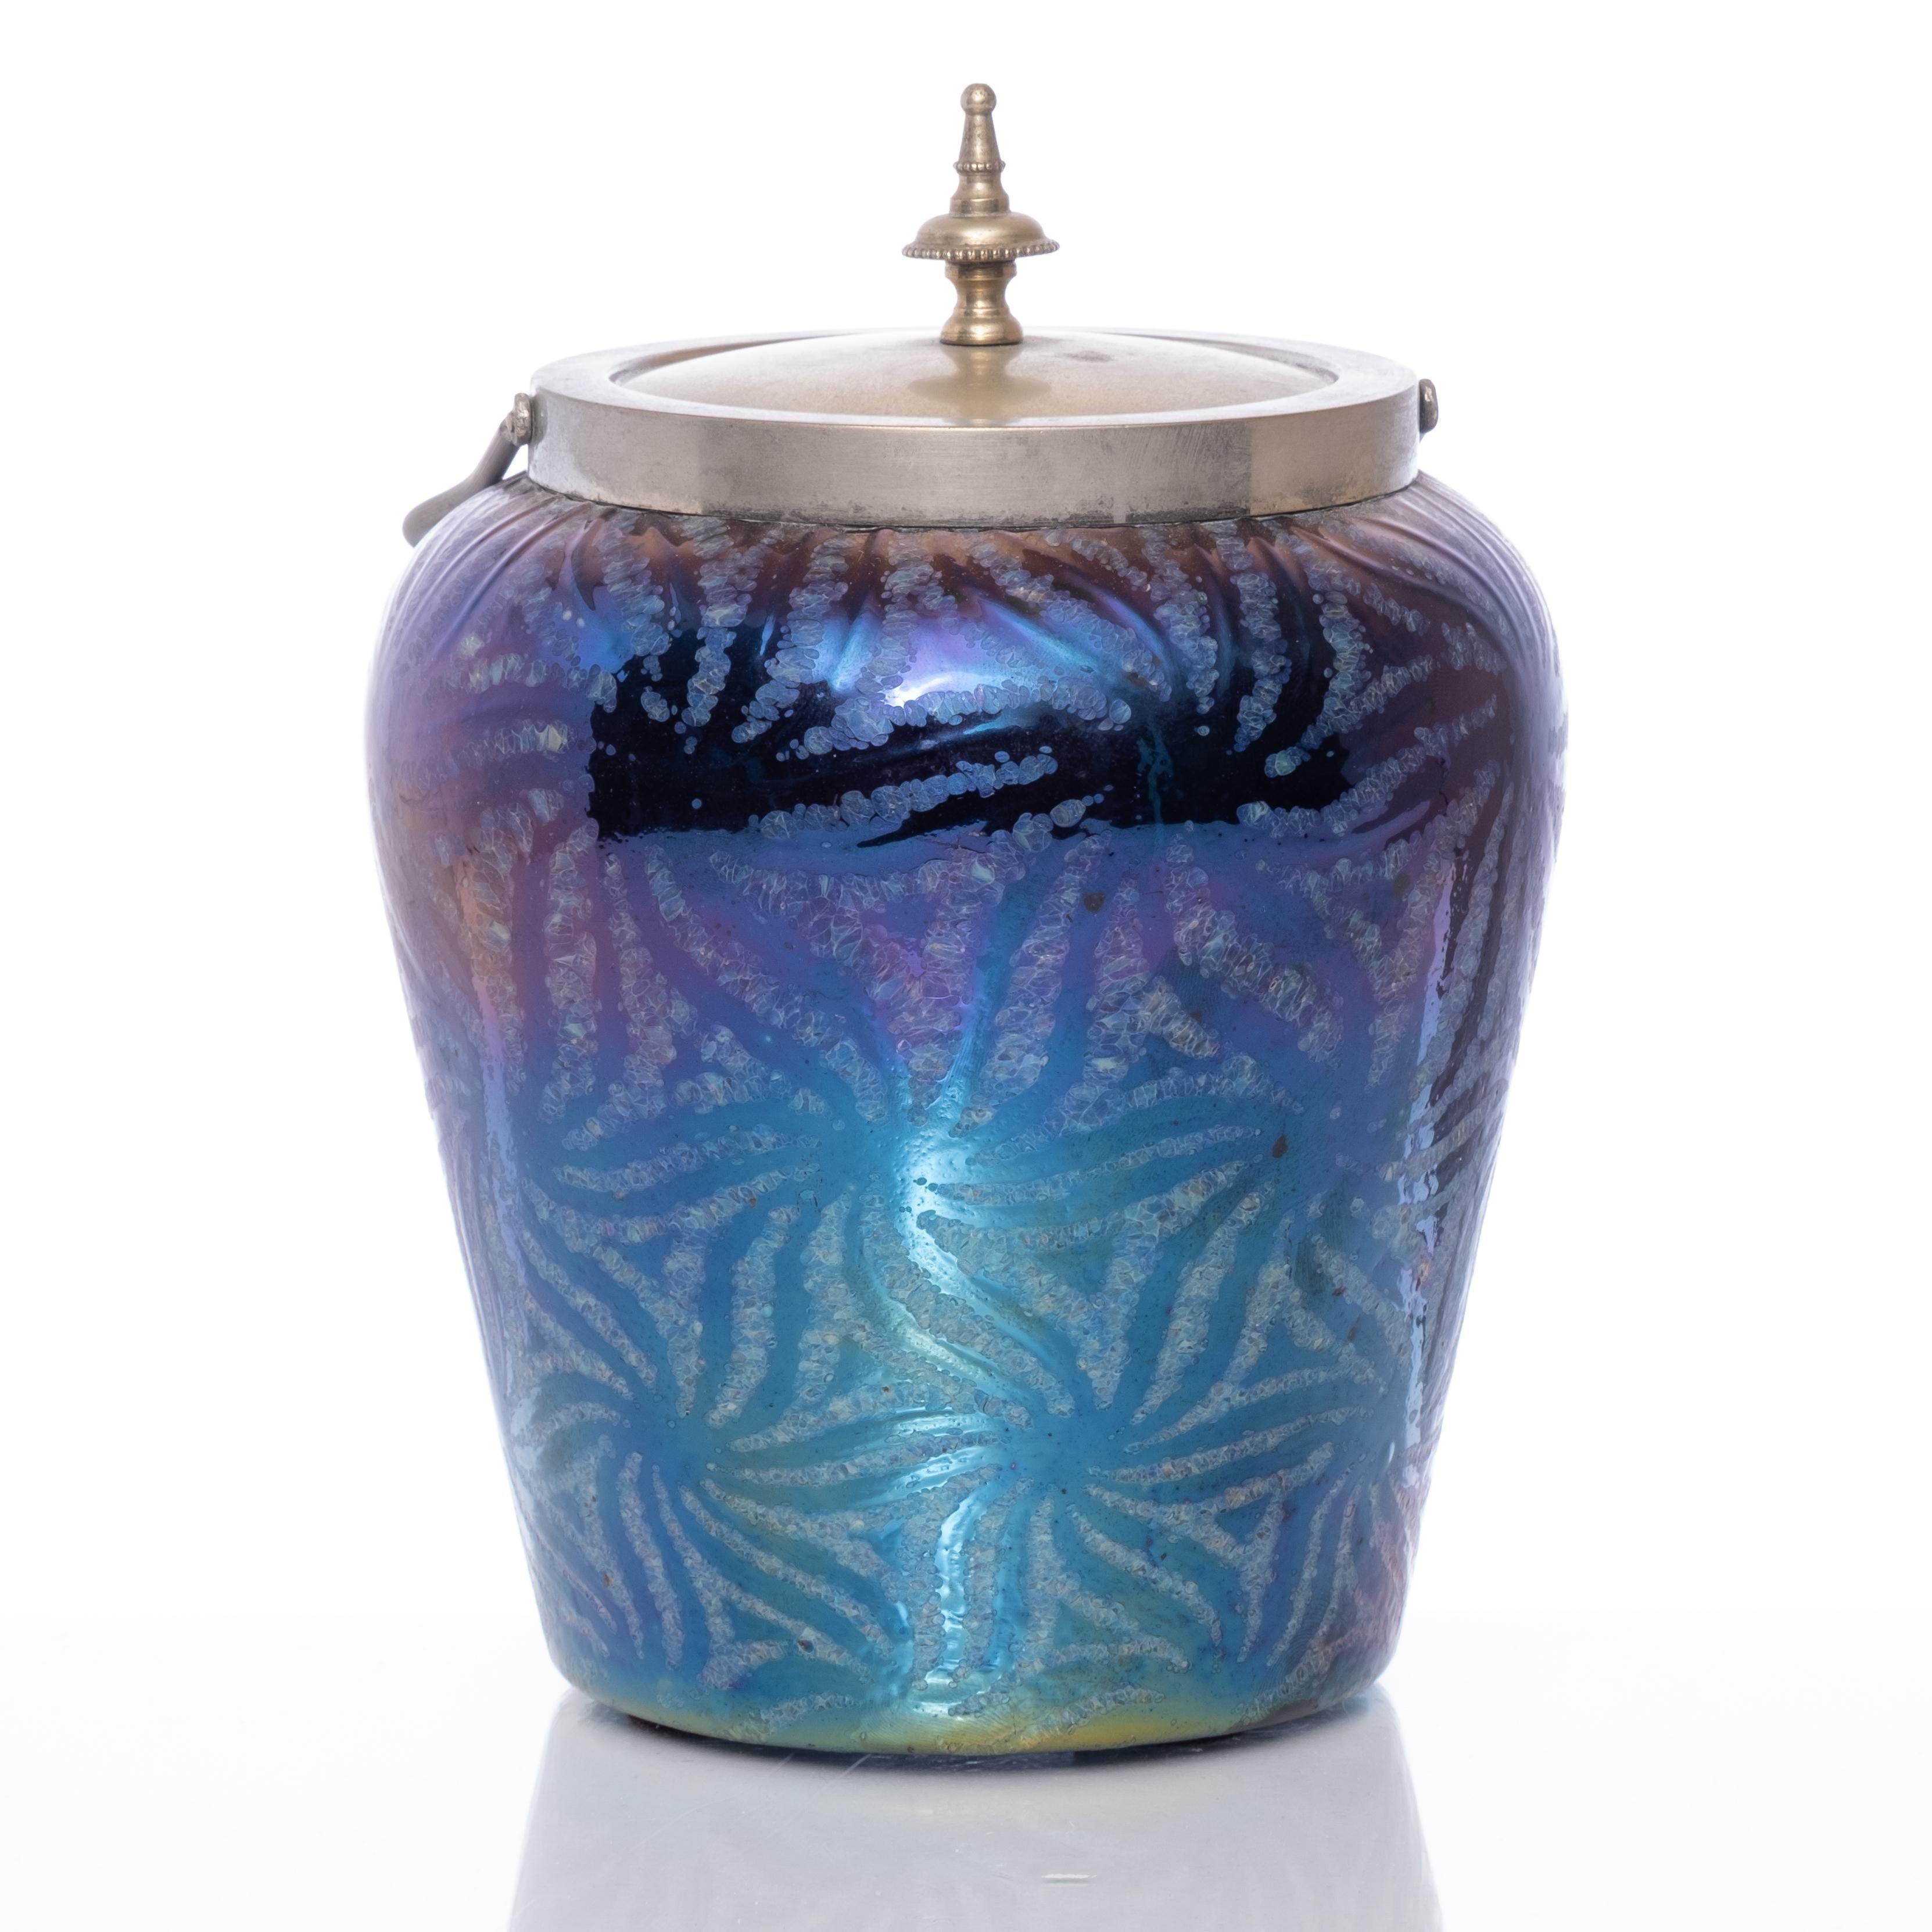 Loetz art nouveau period iridescent art glass covered biscuit jar with epns collar and cover, circa 1910. Unmarked. Dimensions: 6 3/4